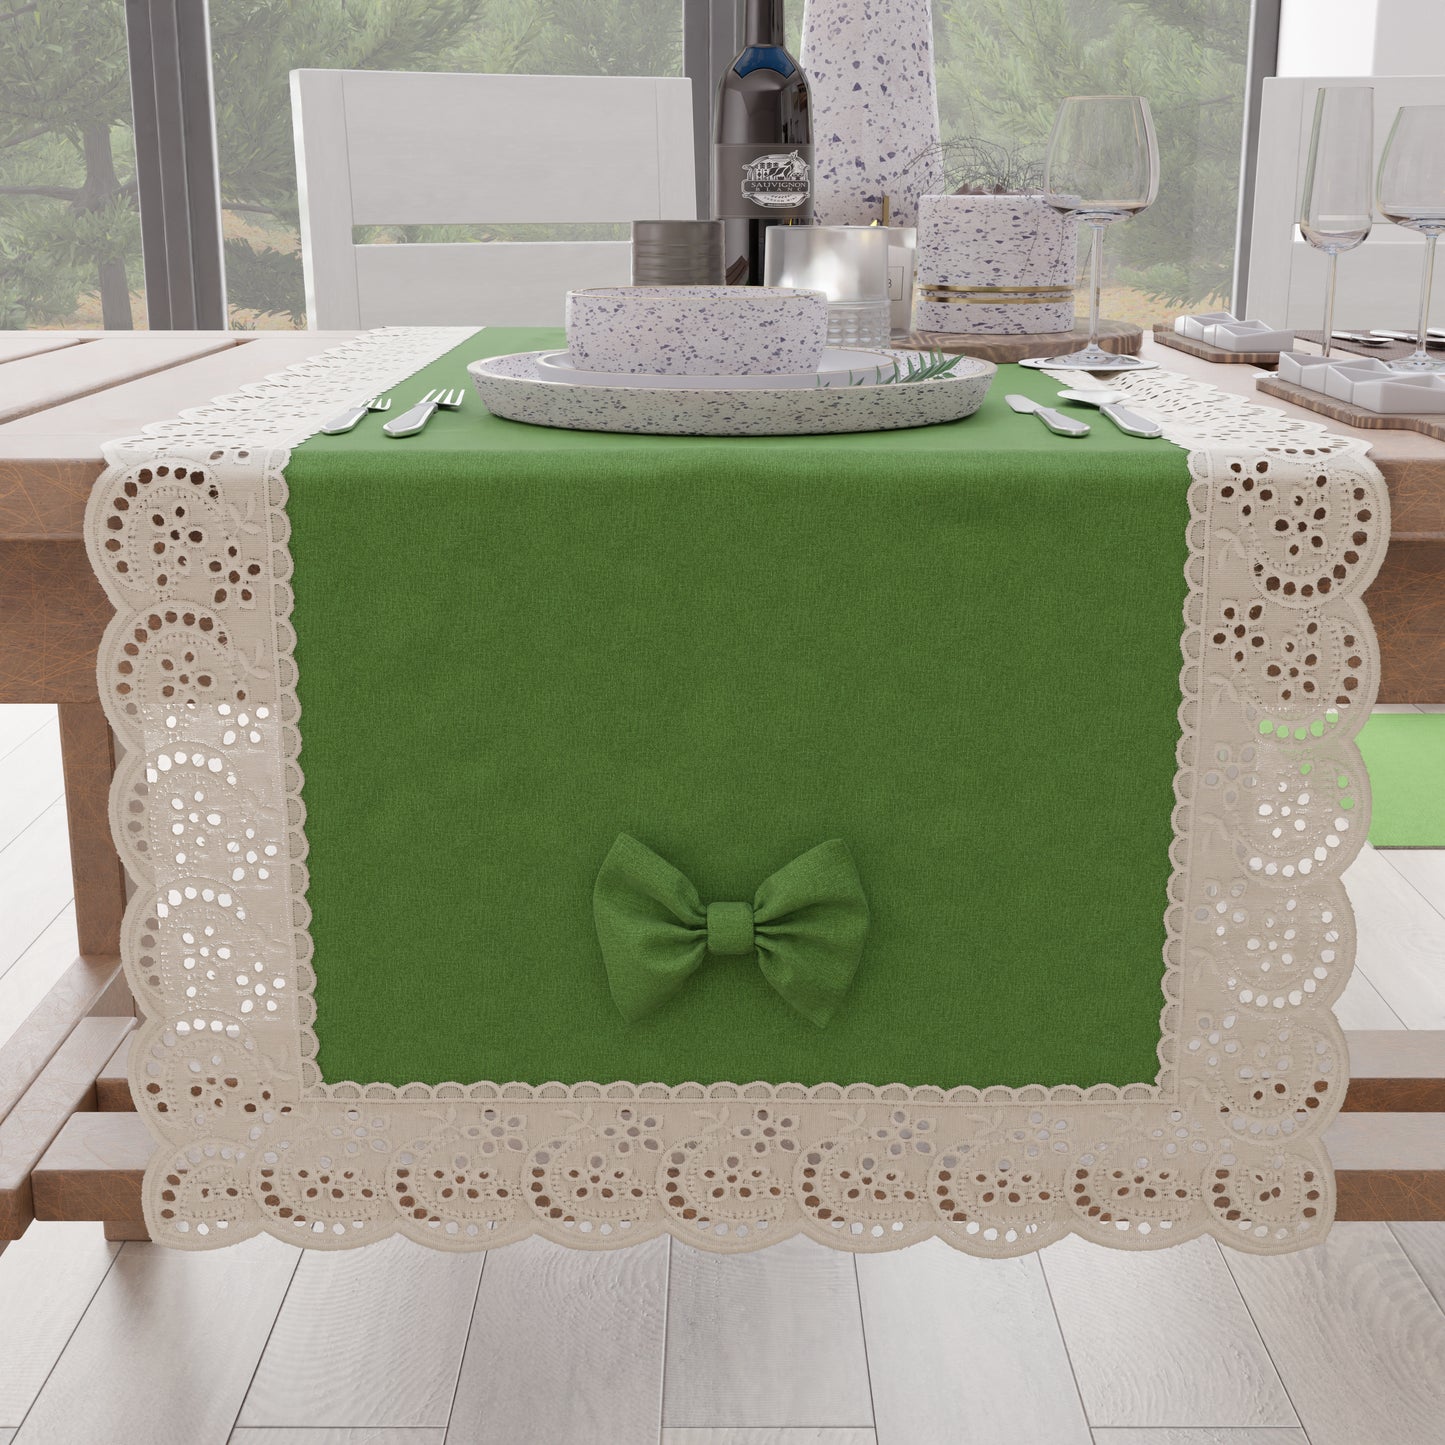 Elegant Shabby Chic Table Runner with Lace and Green Bows 